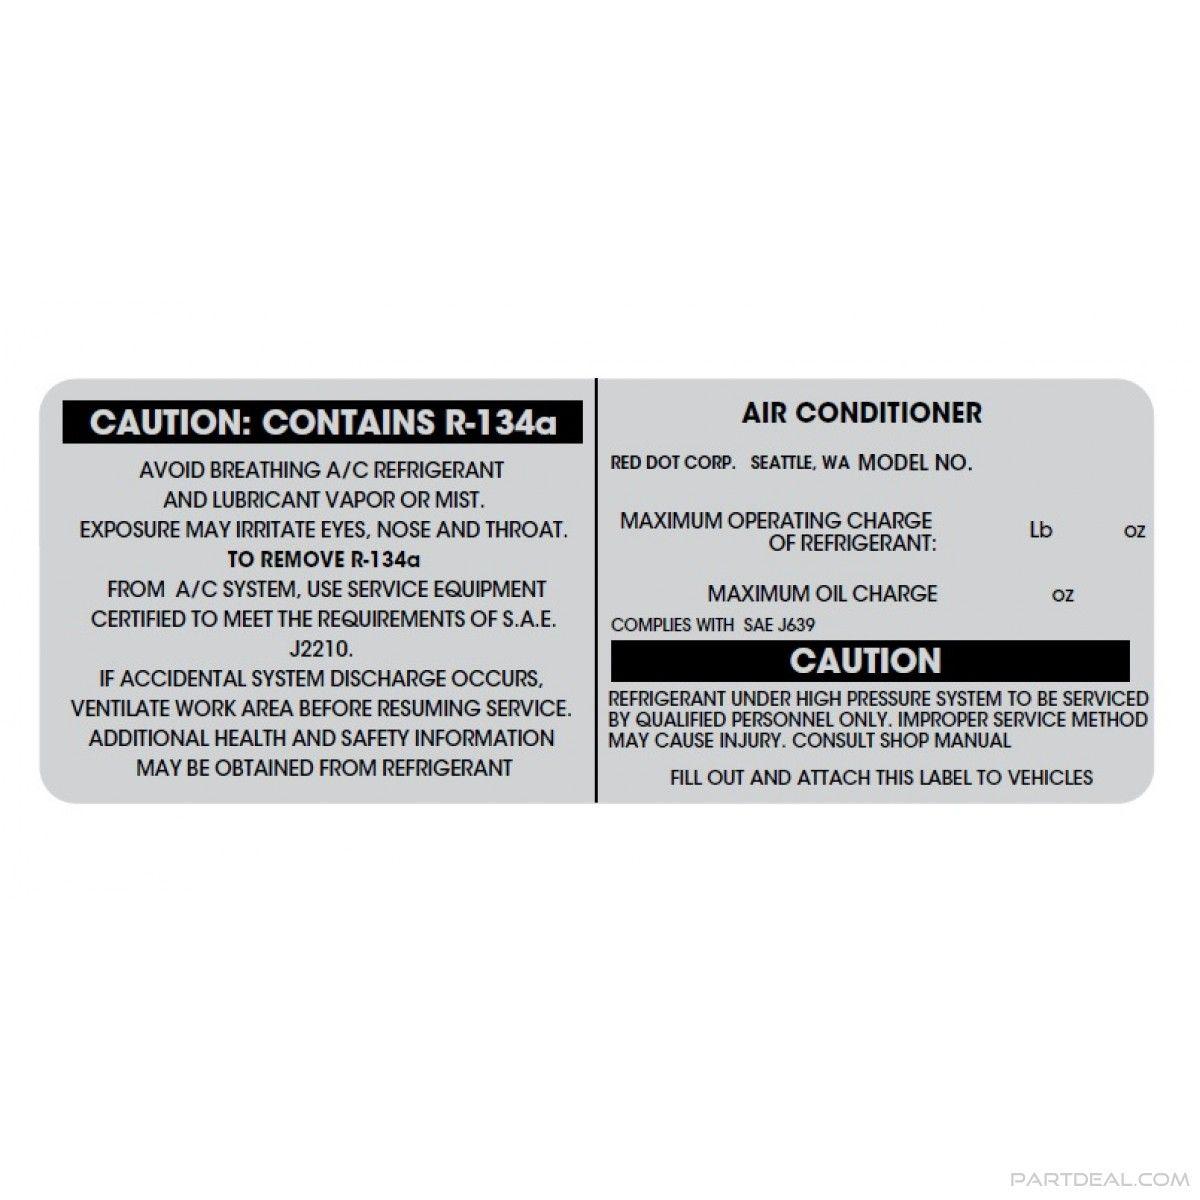 Red Dot Corp Logo - Red Dot-Red Dot R-134a Refrigerant Caution Label - 10 pcs - 79R0020 ...